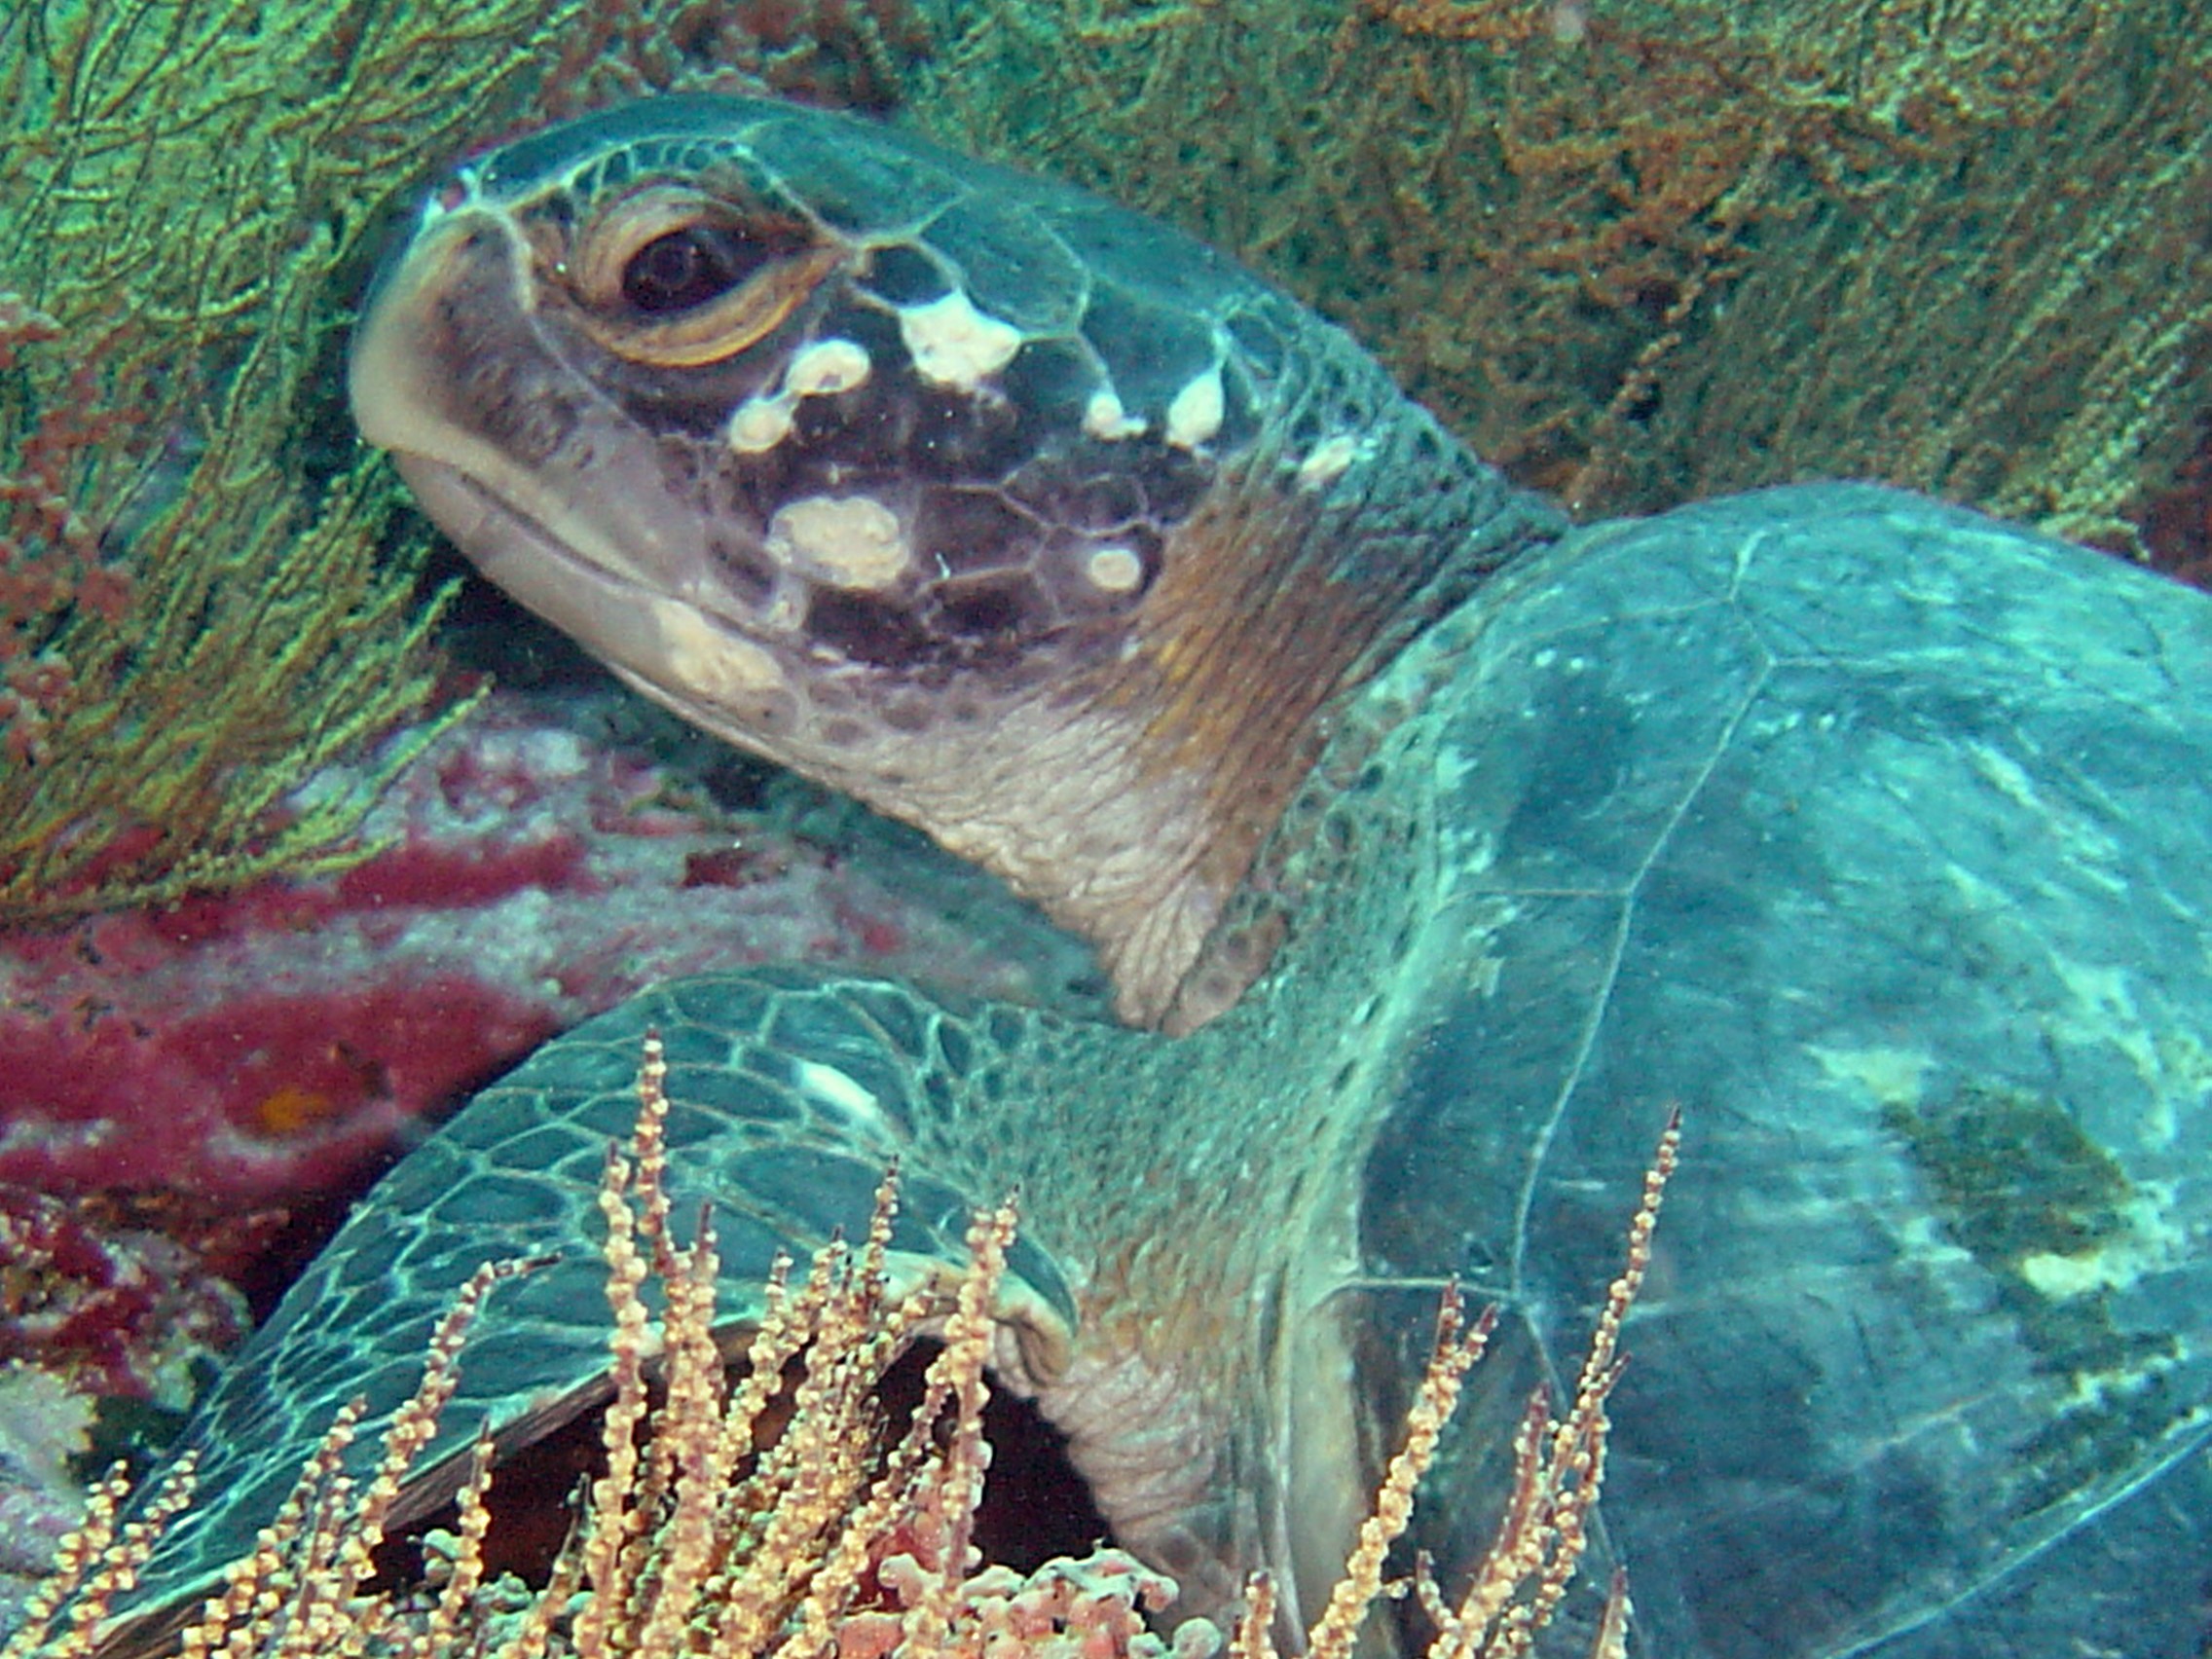 Snorkeling with sea turtles in the Galapagos Islands